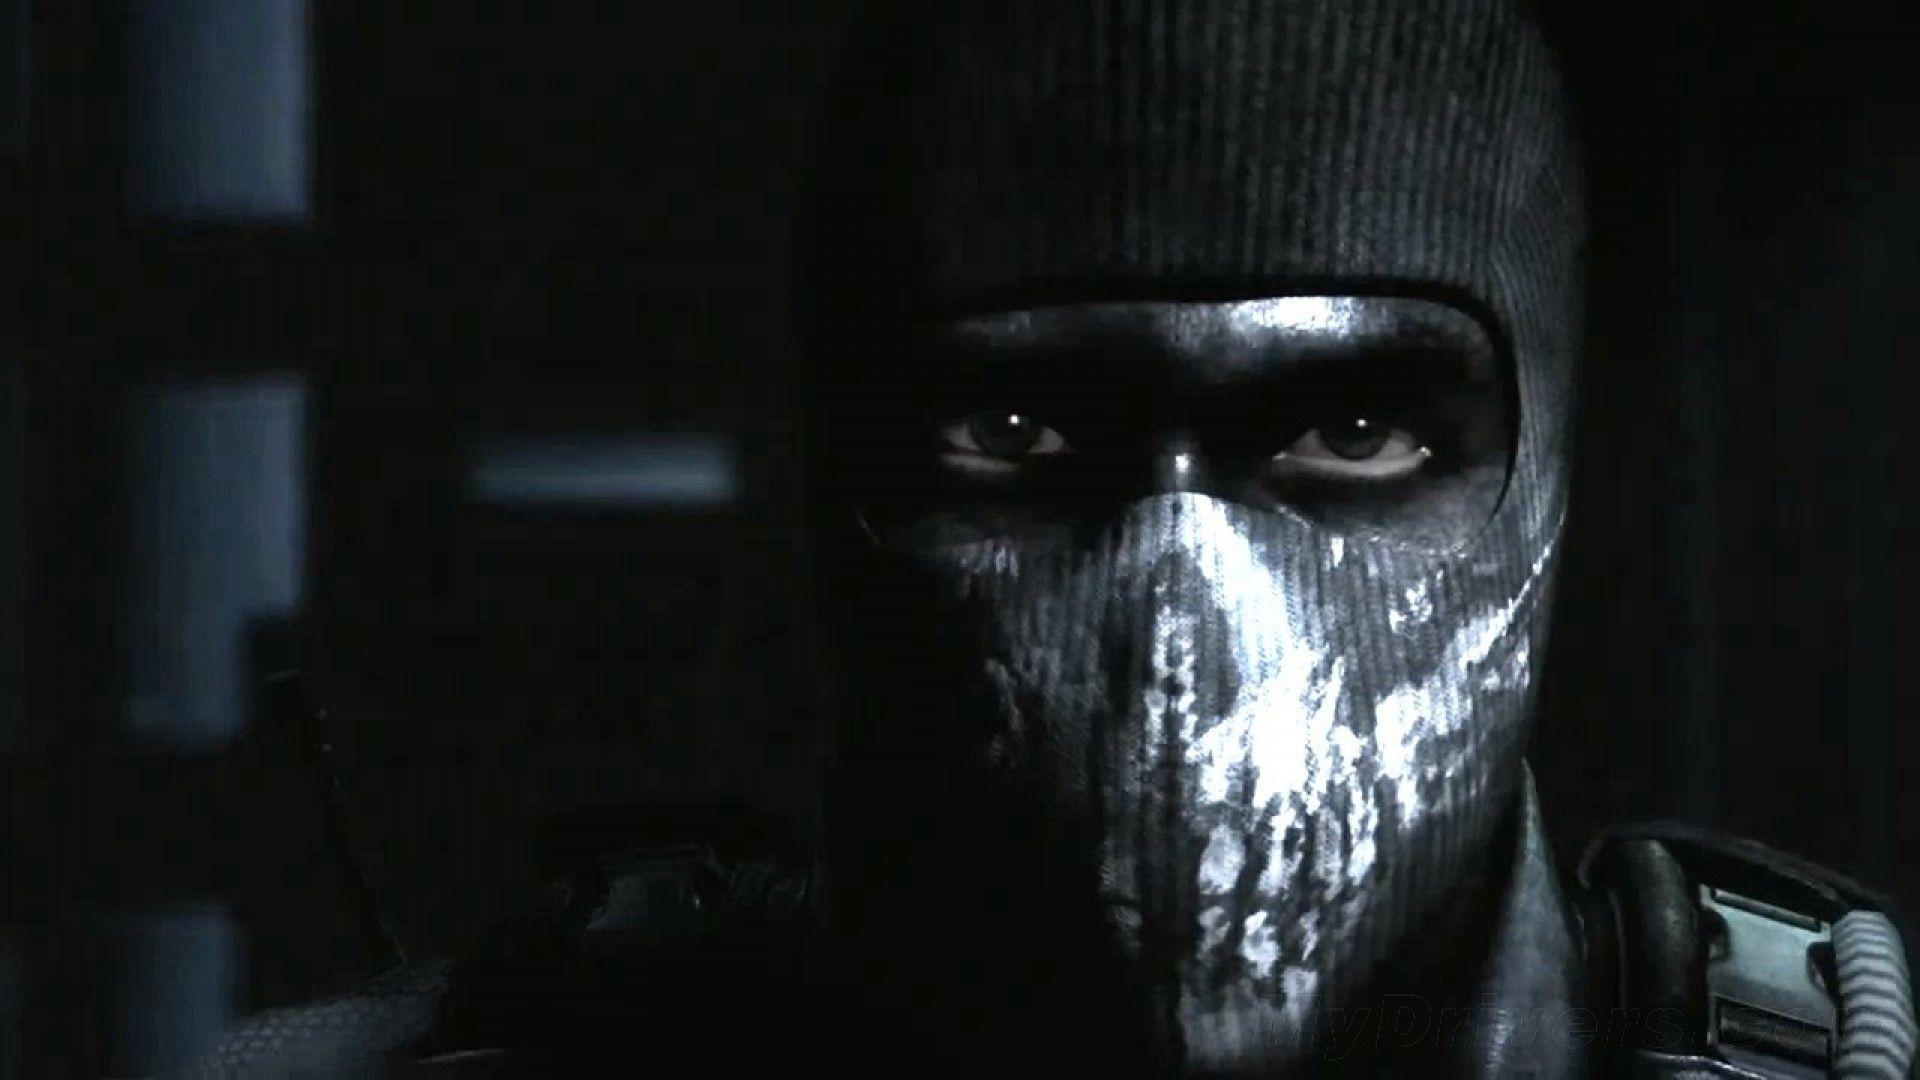 call of duty ghosts hd wallpaper 1080p